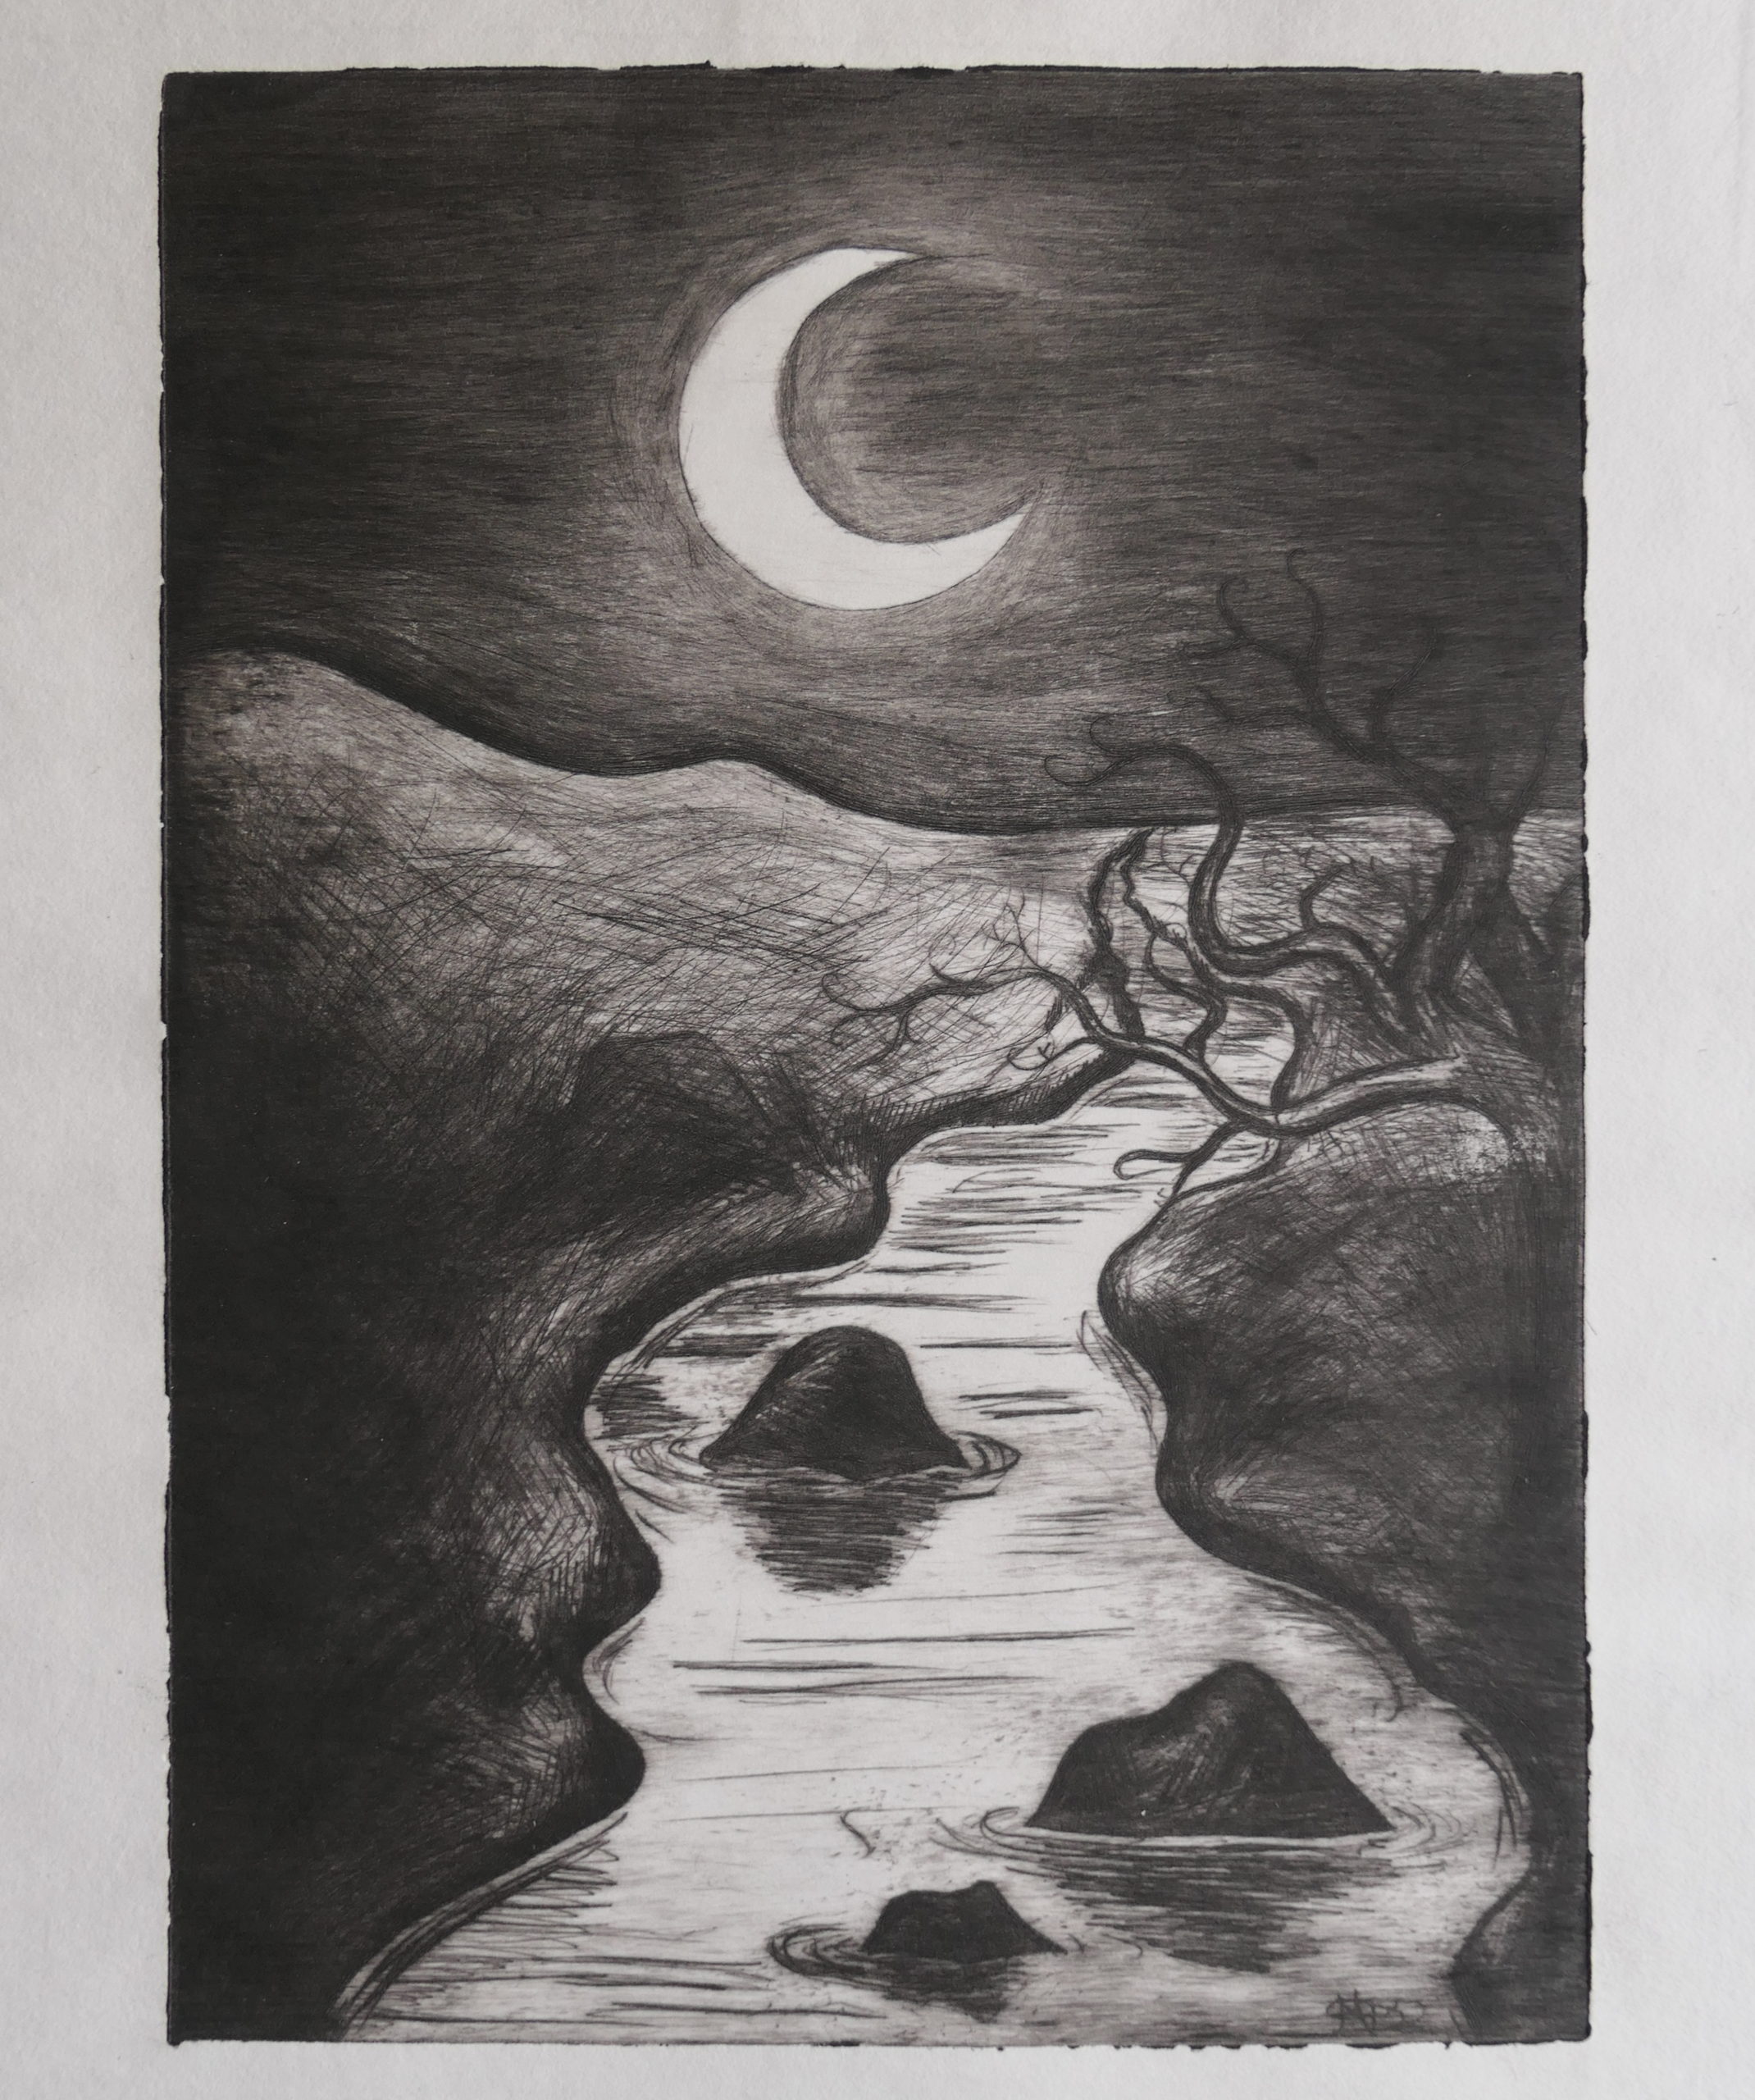 19 – Play of light and darkness – printing/etching